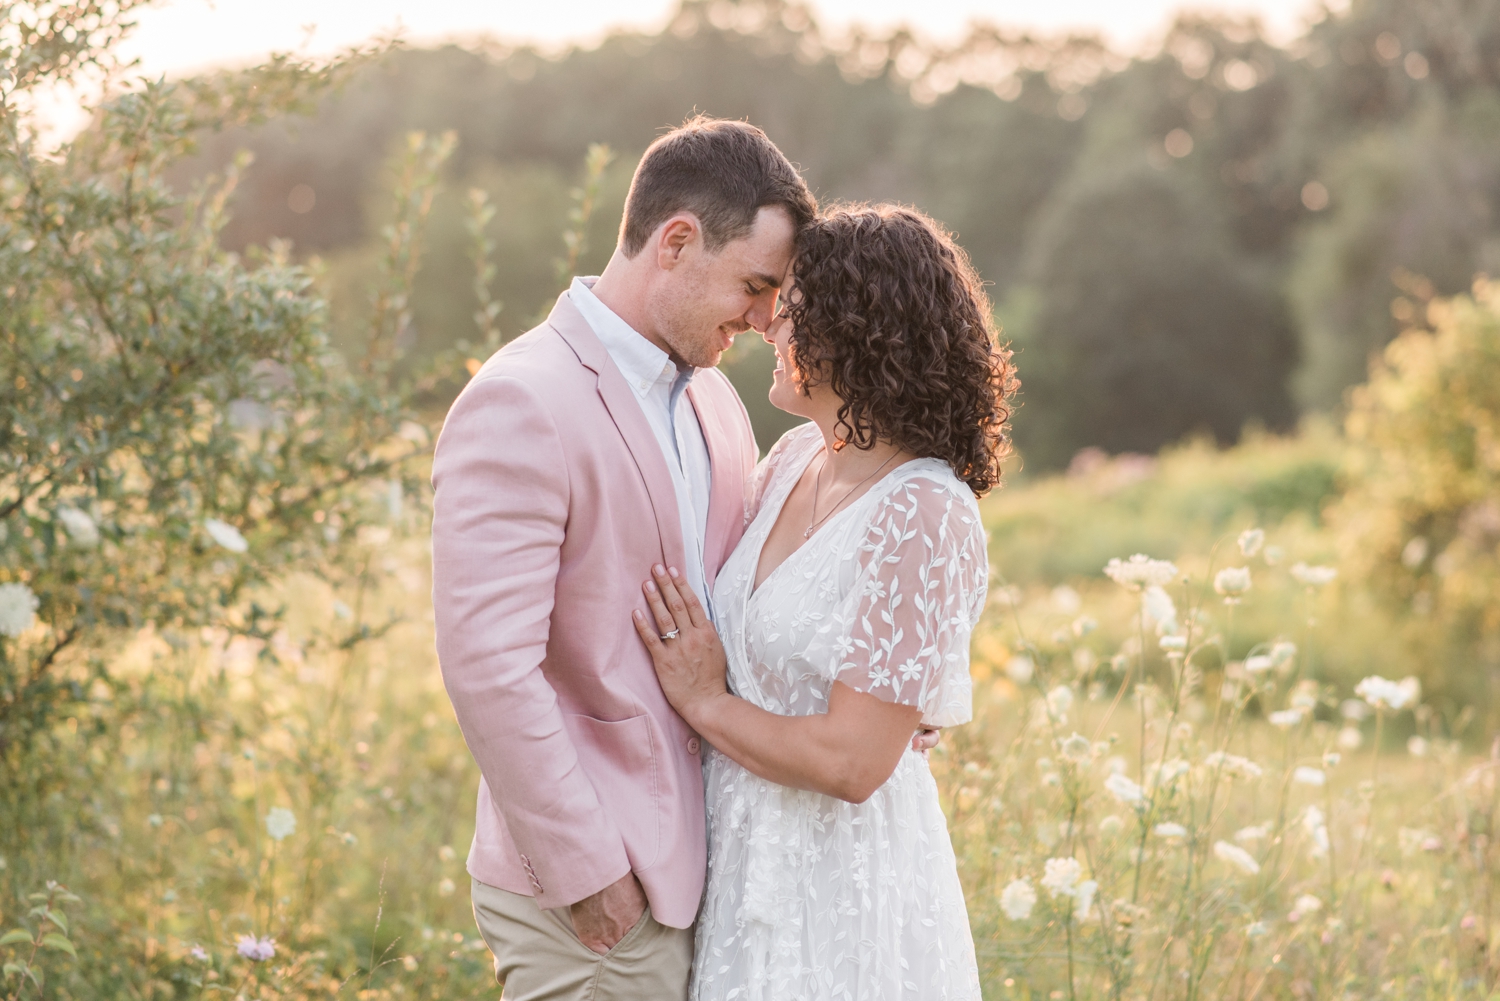 photo of engaged couple at Wildflower Sunset Picnic Engagement Session at Metea Park by Courtney Rudicel, a wedding photographer in Indiana